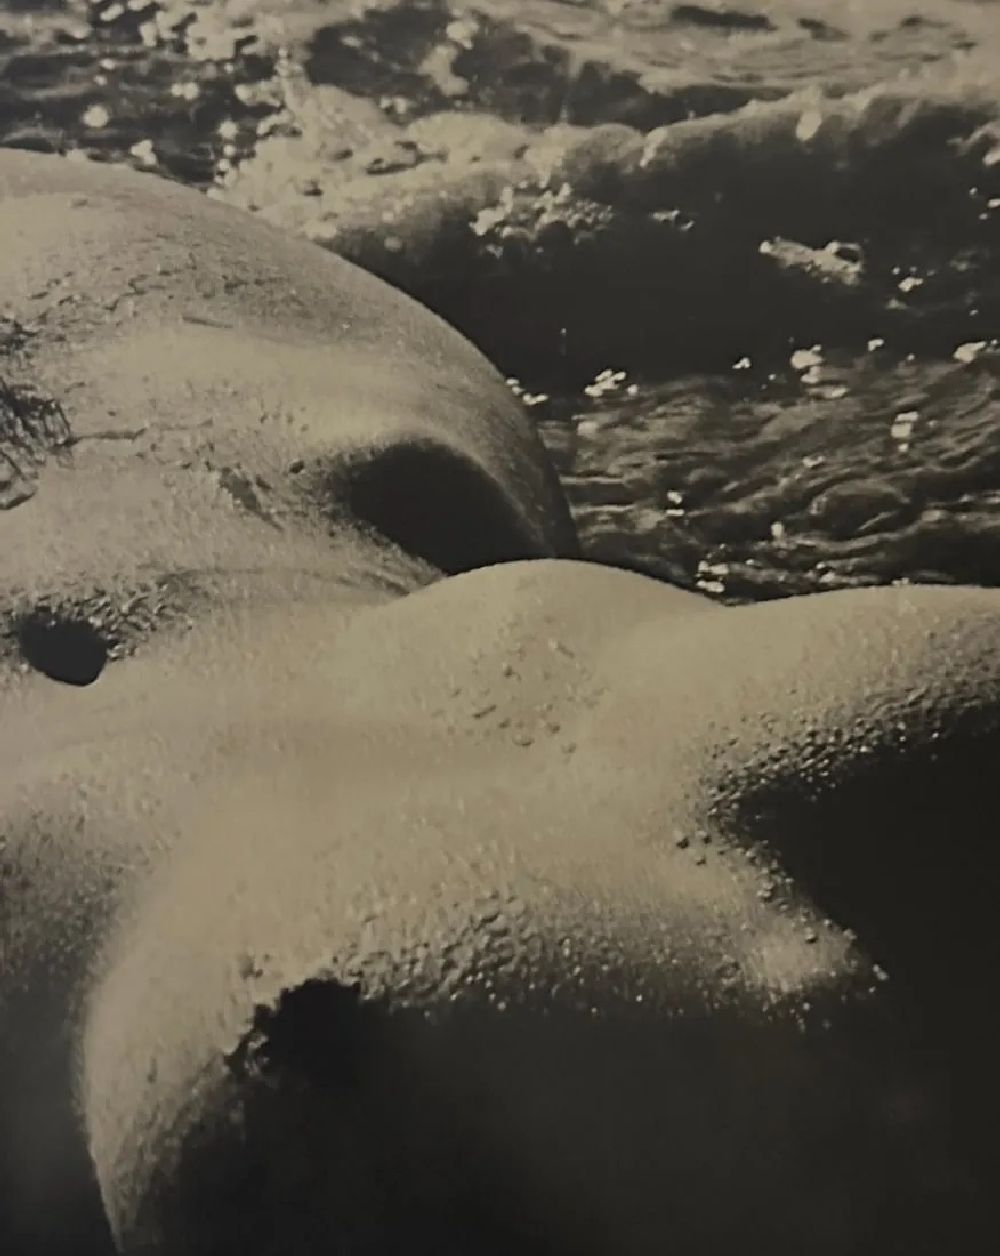 Lucien Clergue "Untitled" - Image 6 of 6